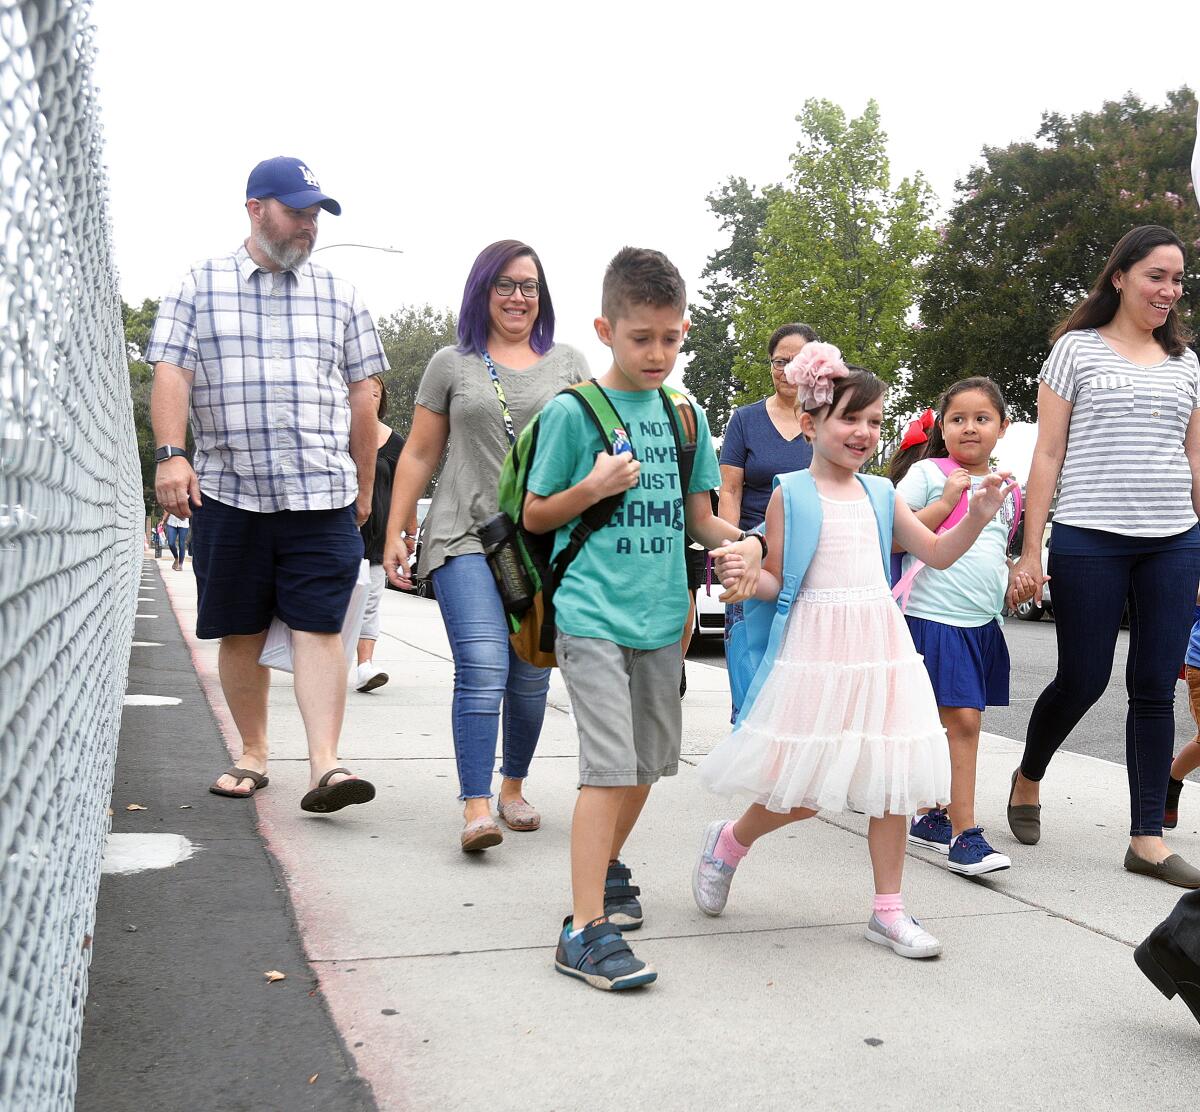 Liam, 8, and Maisie Kolpek, 5, walk hand-in-hand with their parents, Kristofer and Erin, on their way to the first day of classes at Bret Harte Elementary School on Monday.